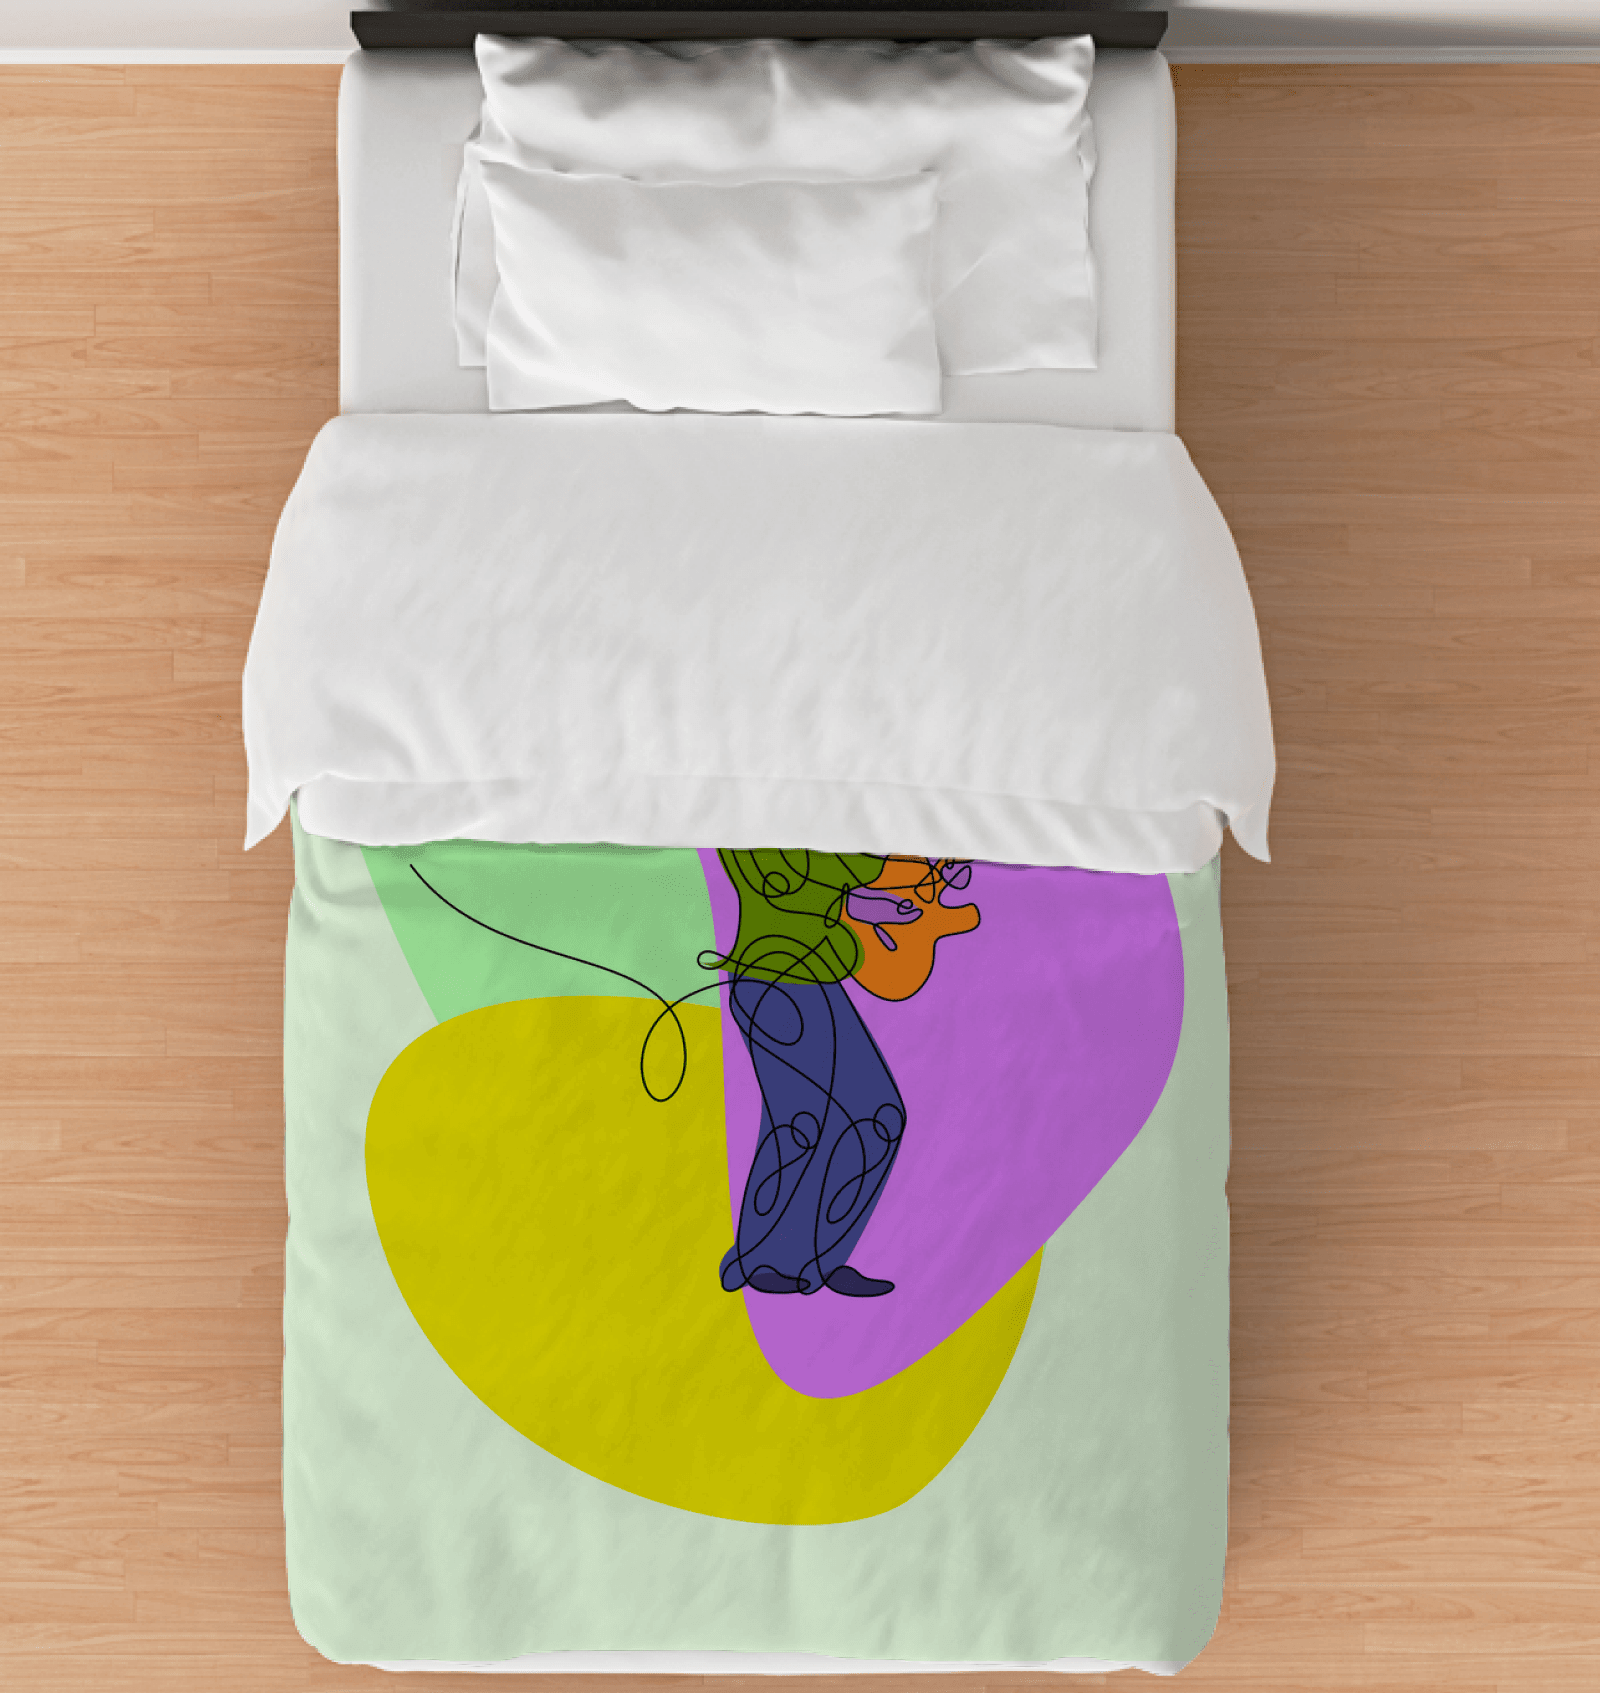 Man With An Electric Guitar Comforter - Twin - Beyond T-shirts